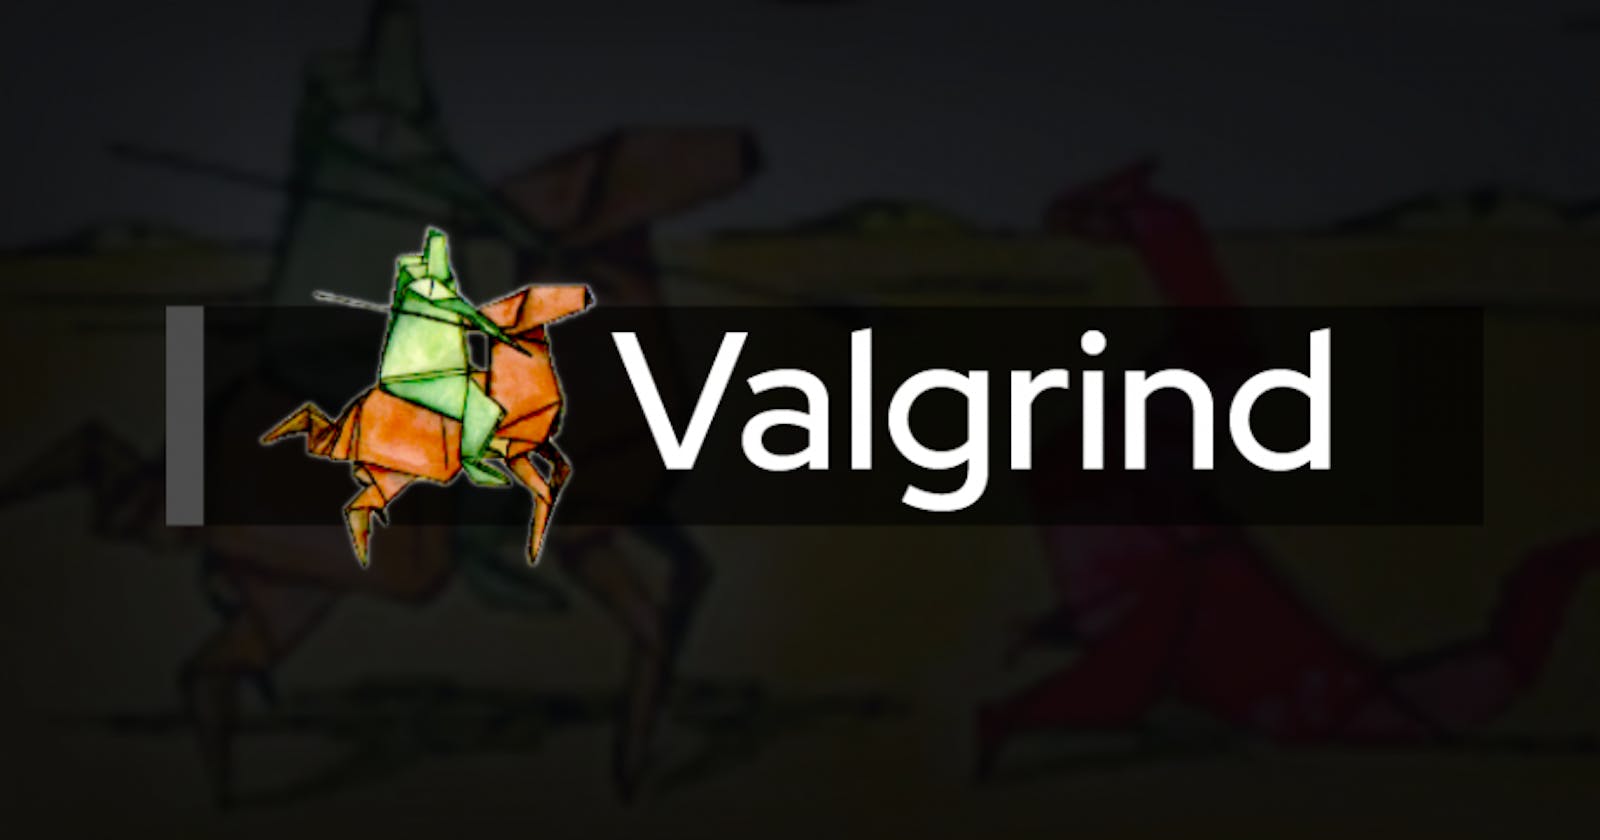 How To Integrate Valgrind into GitHub Actions?